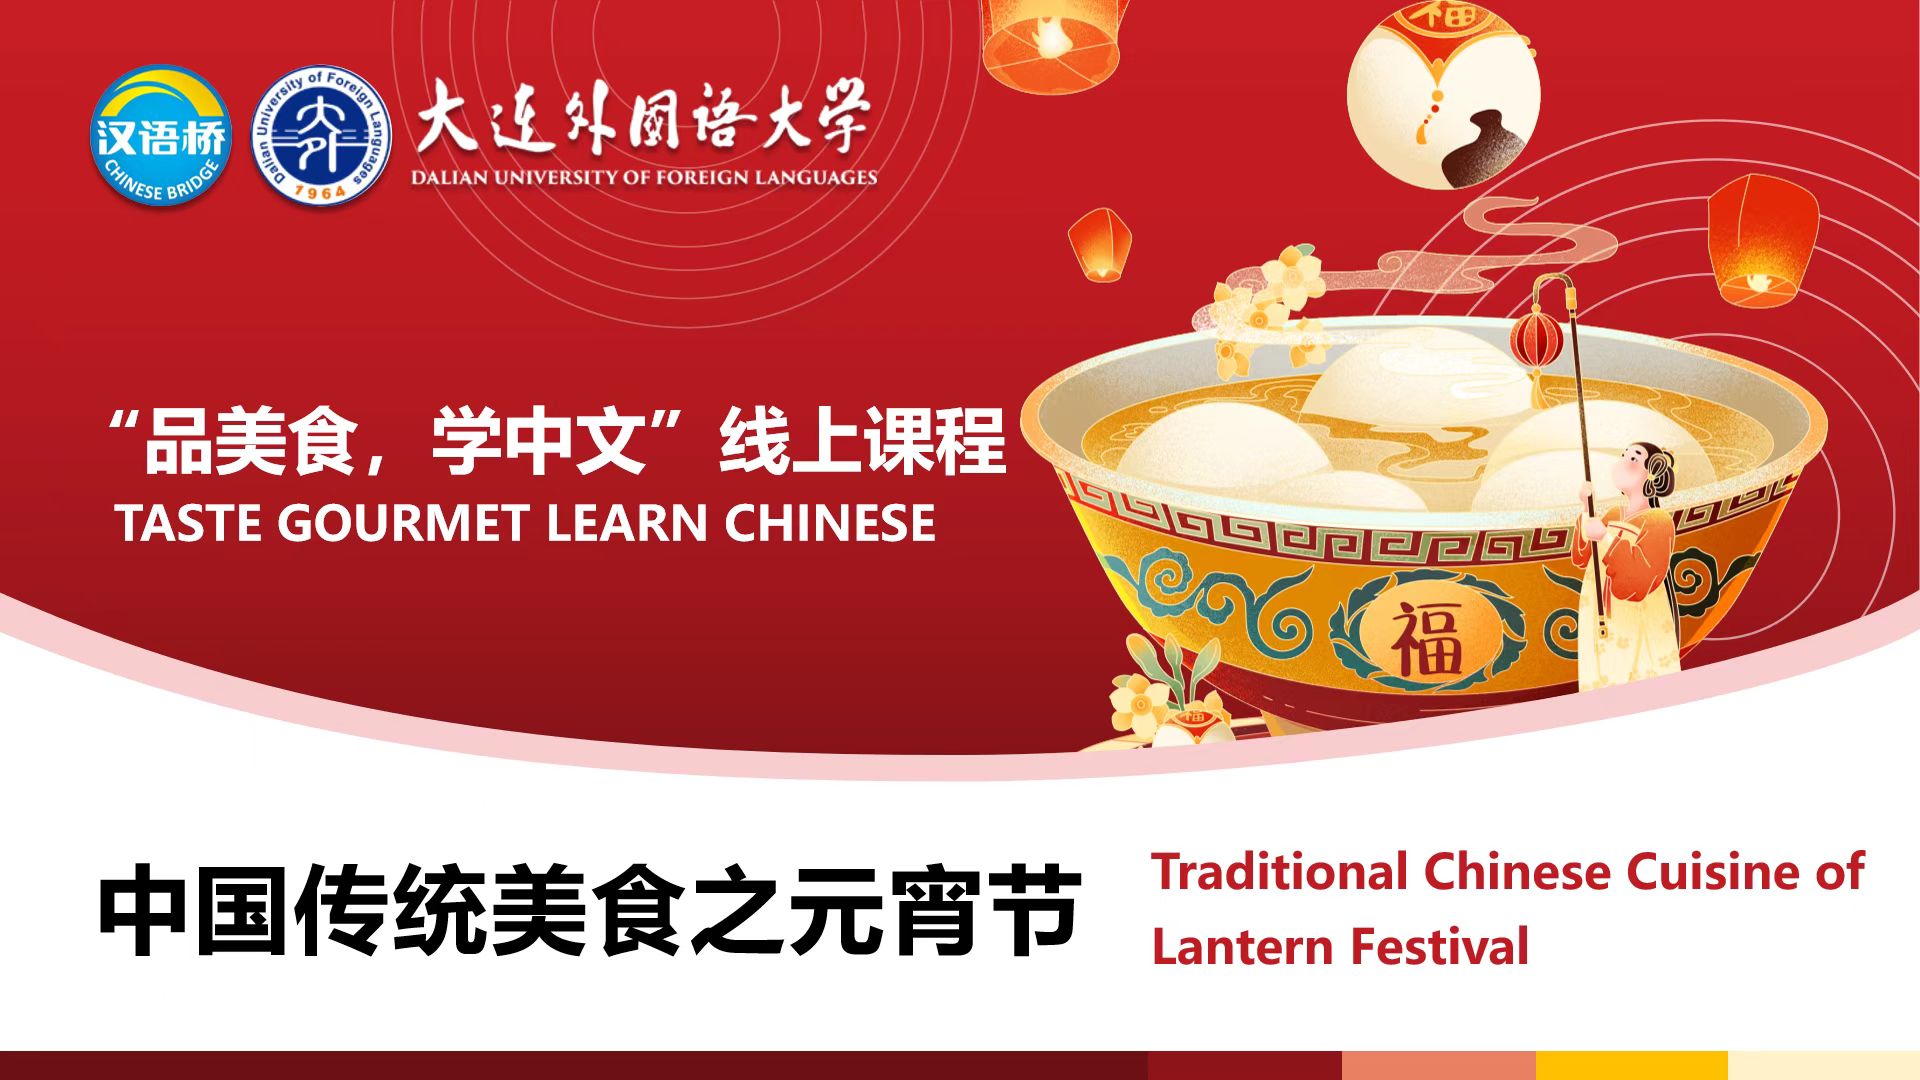 Traditional Chinese Cuisine of Lantern Festival